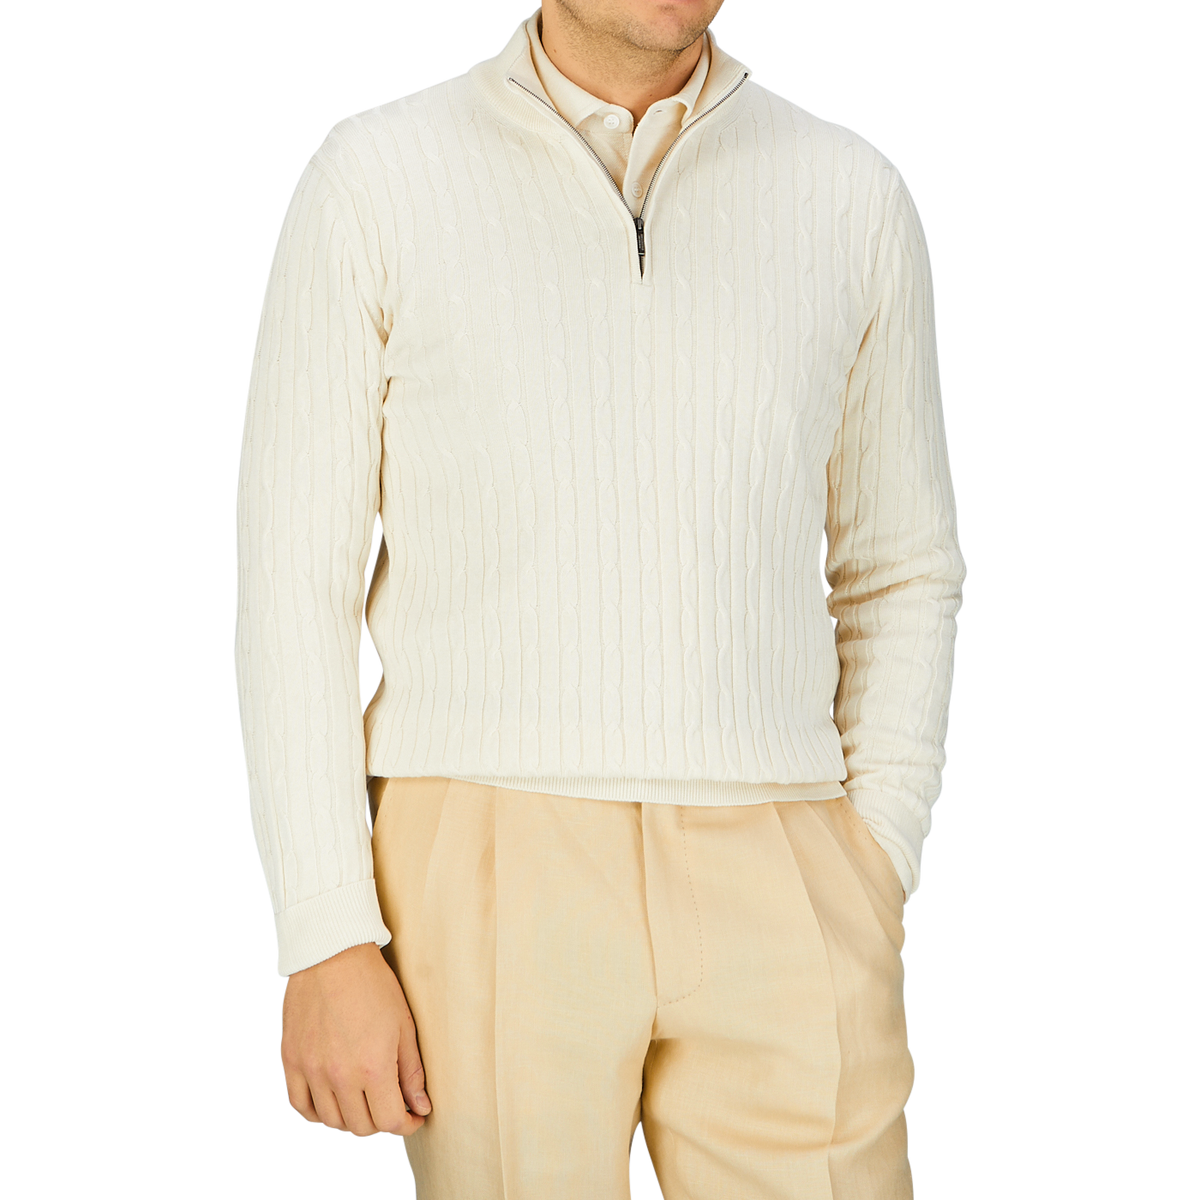 A person wearing a Cream Cotton Silk Cable Knit 1/4 Zip Sweater crafted by Maurizio Baldassari, with a zipper collar and light beige trousers.